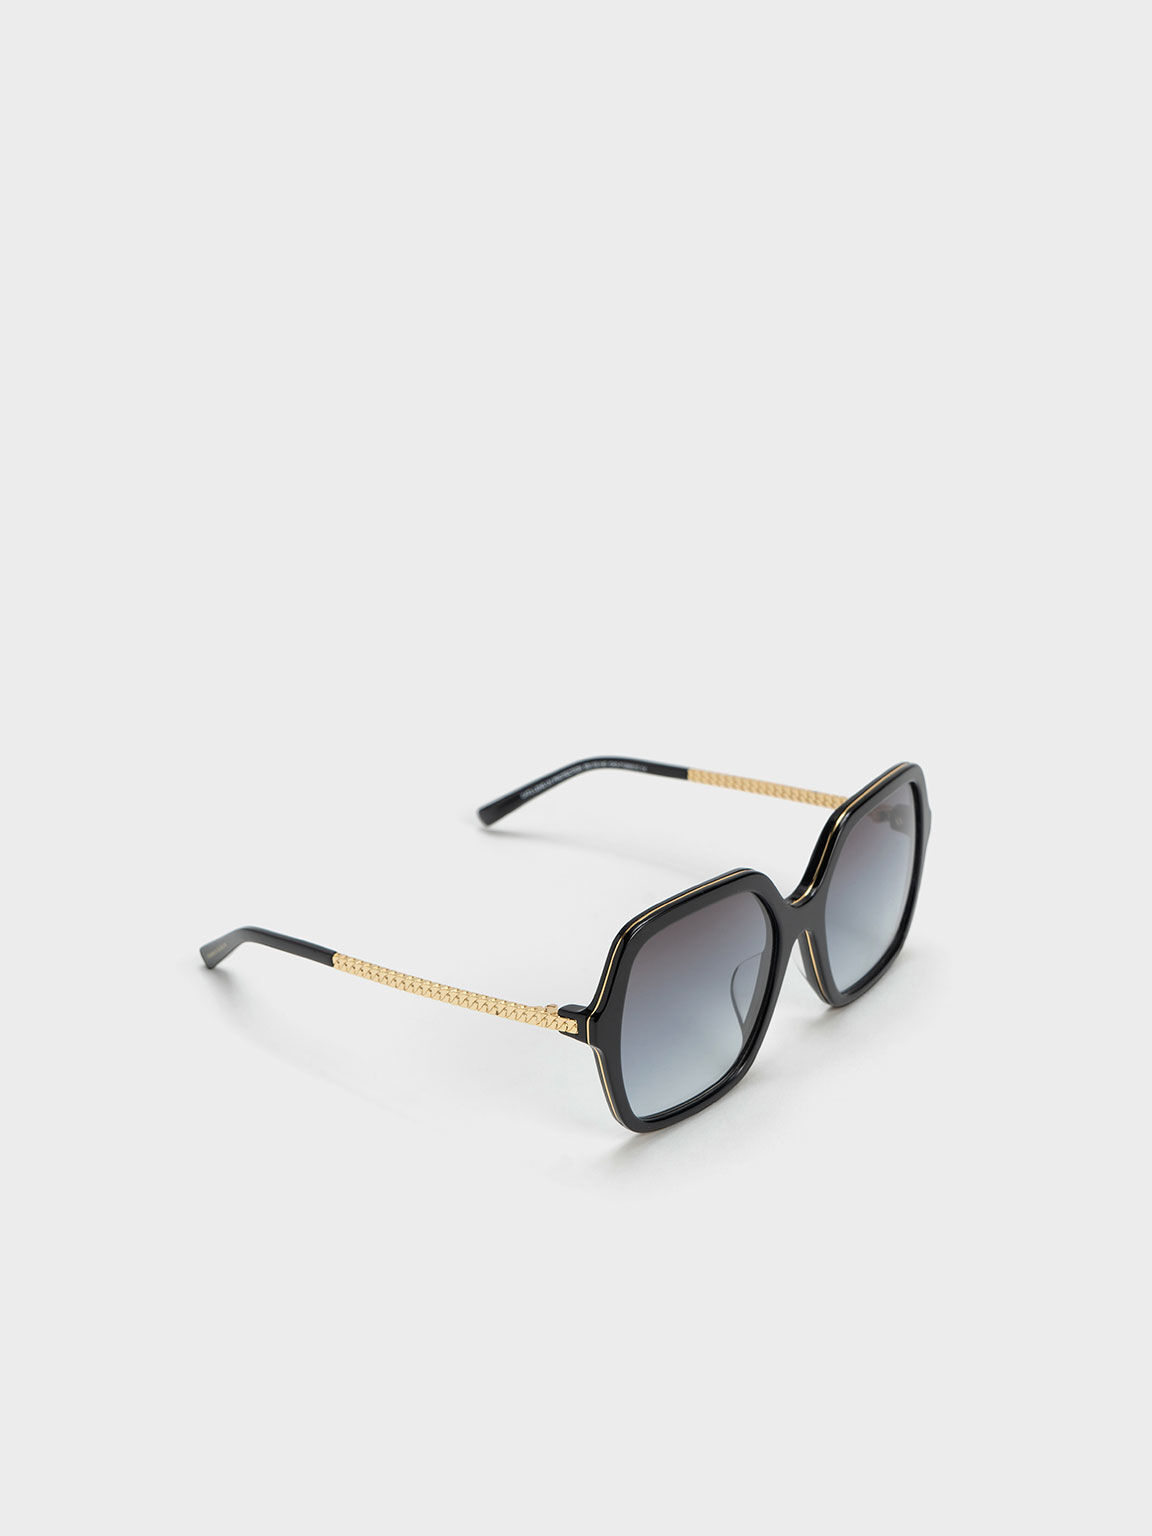 Acetate Braided Temple Butterfly Sunglasses, Black, hi-res